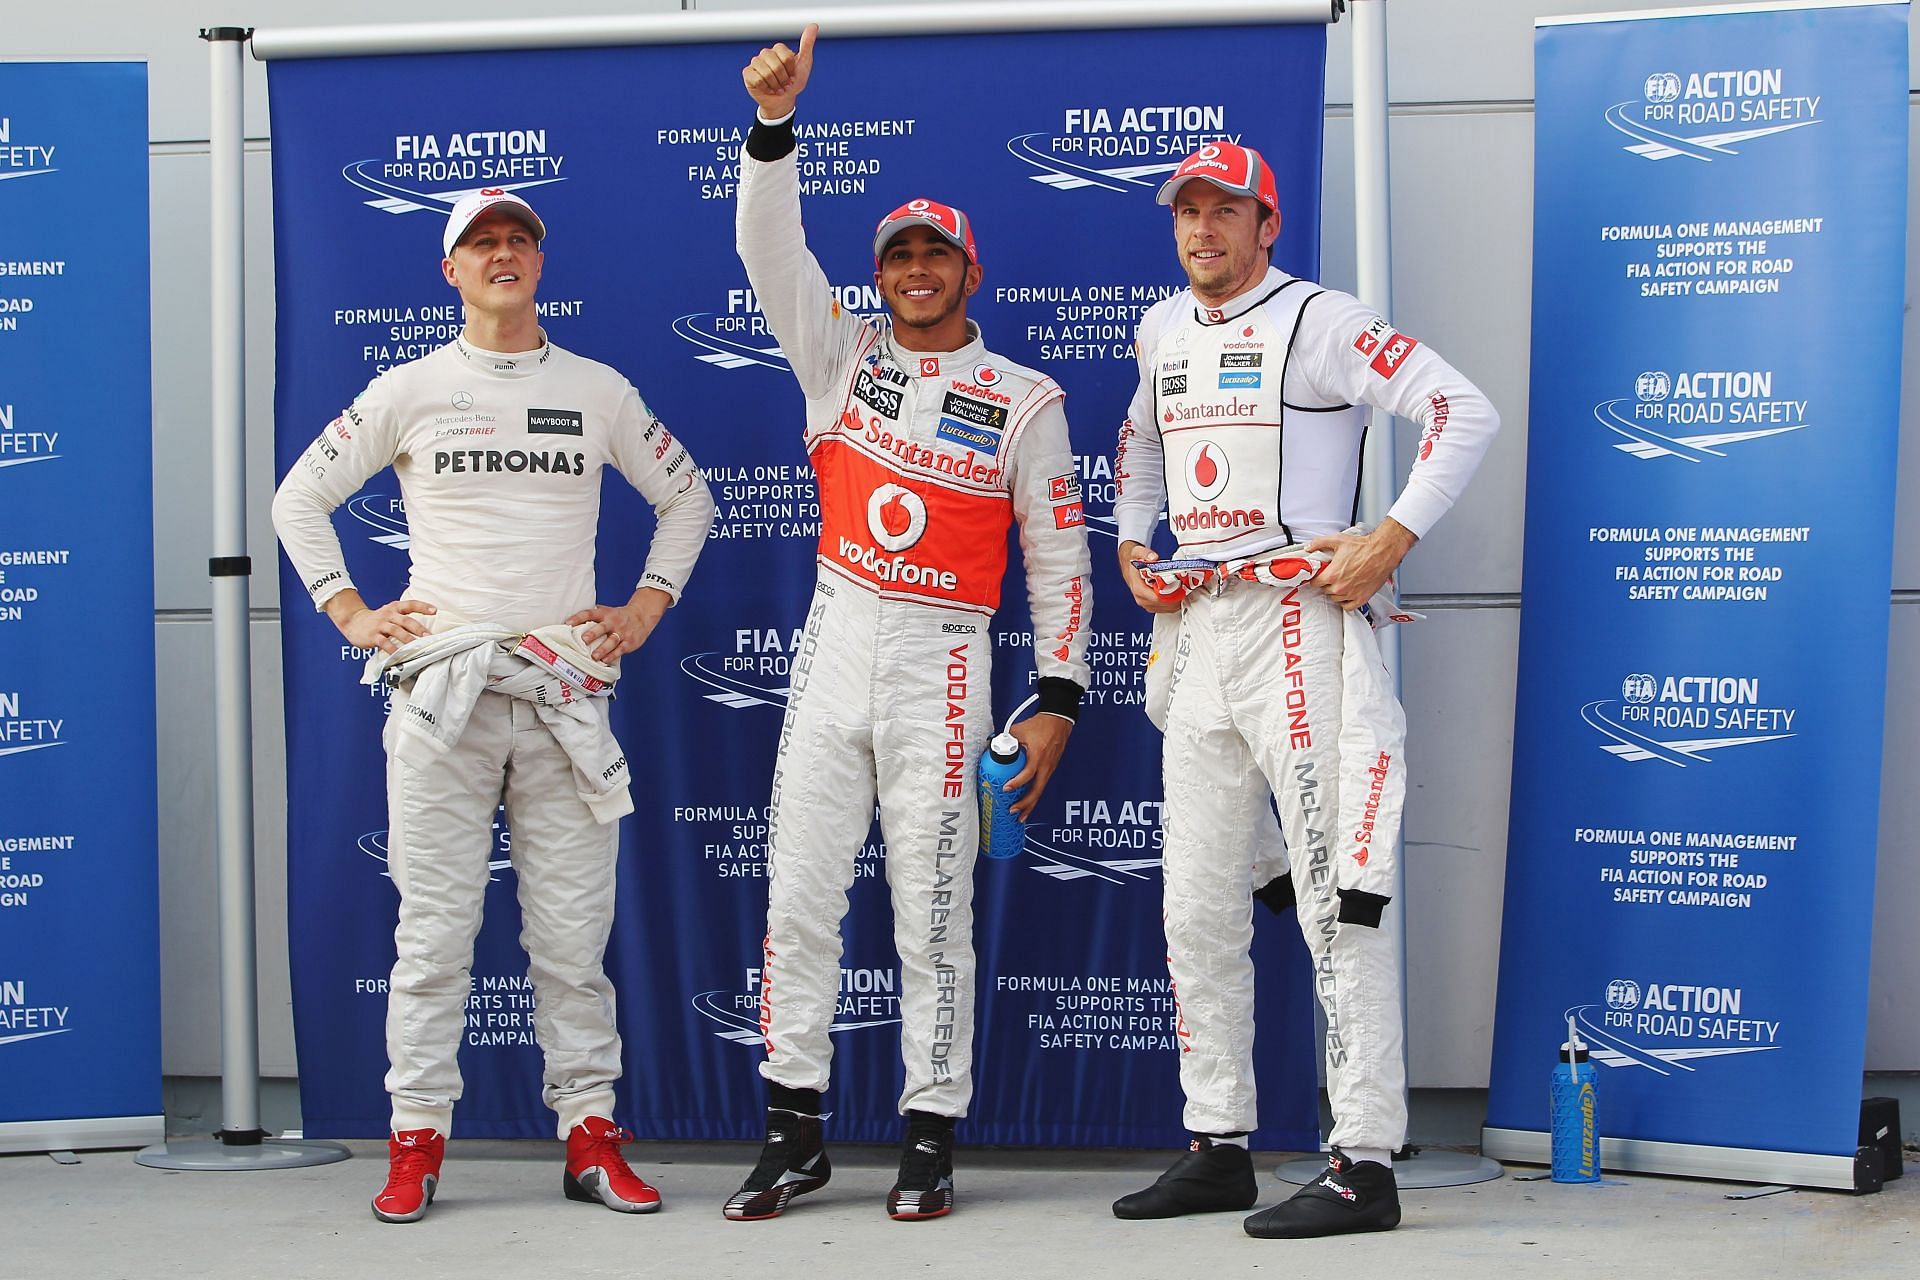 F1 Grand Prix of Malaysia 2010 - Lewis Hamilton with Michael Schumacher (left) and Jenson Button (right)